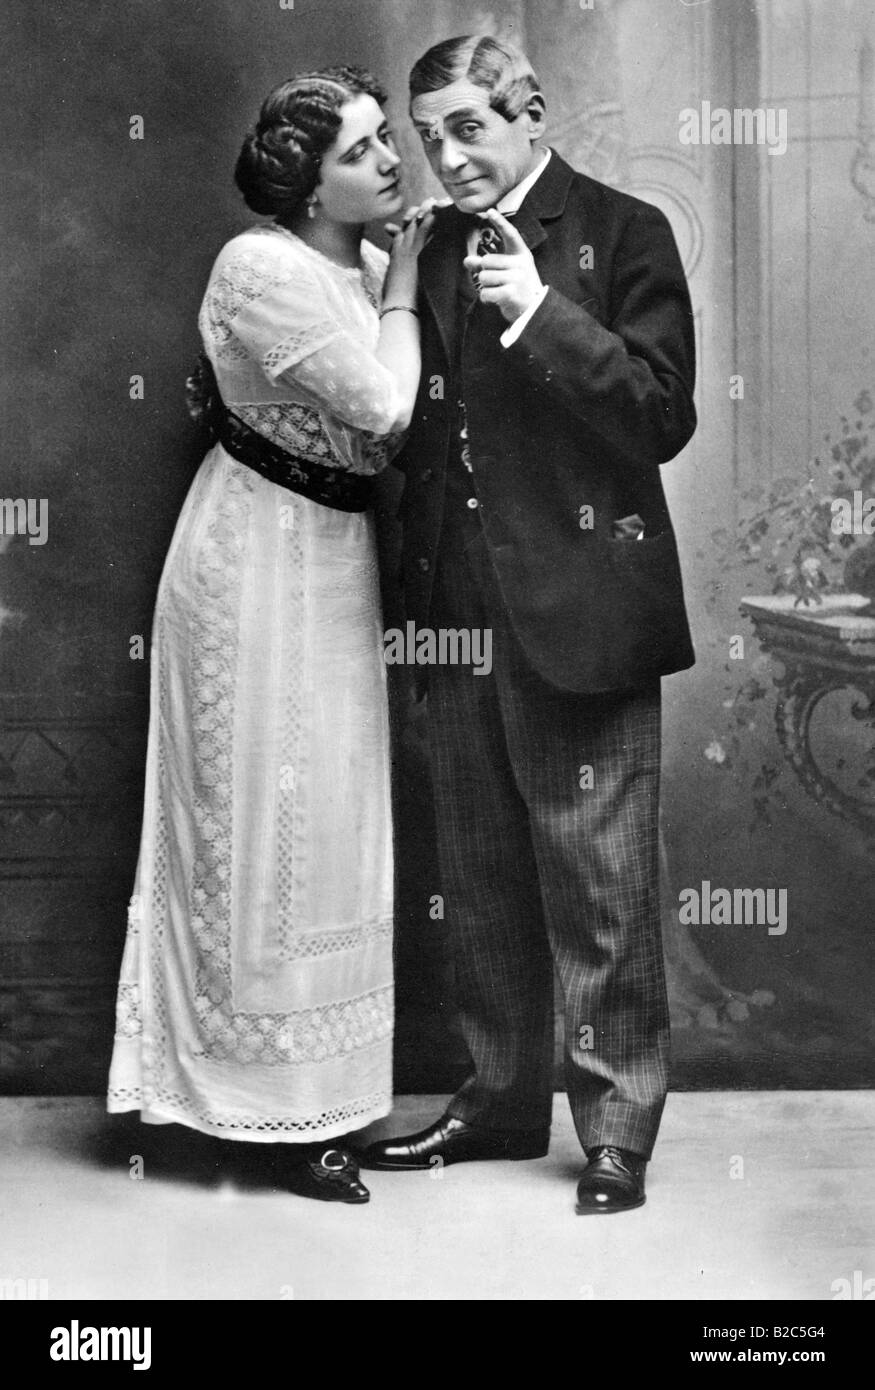 Das Gluecksmaedel, couple standing next to each other, historic picture from about 1920 Stock Photo